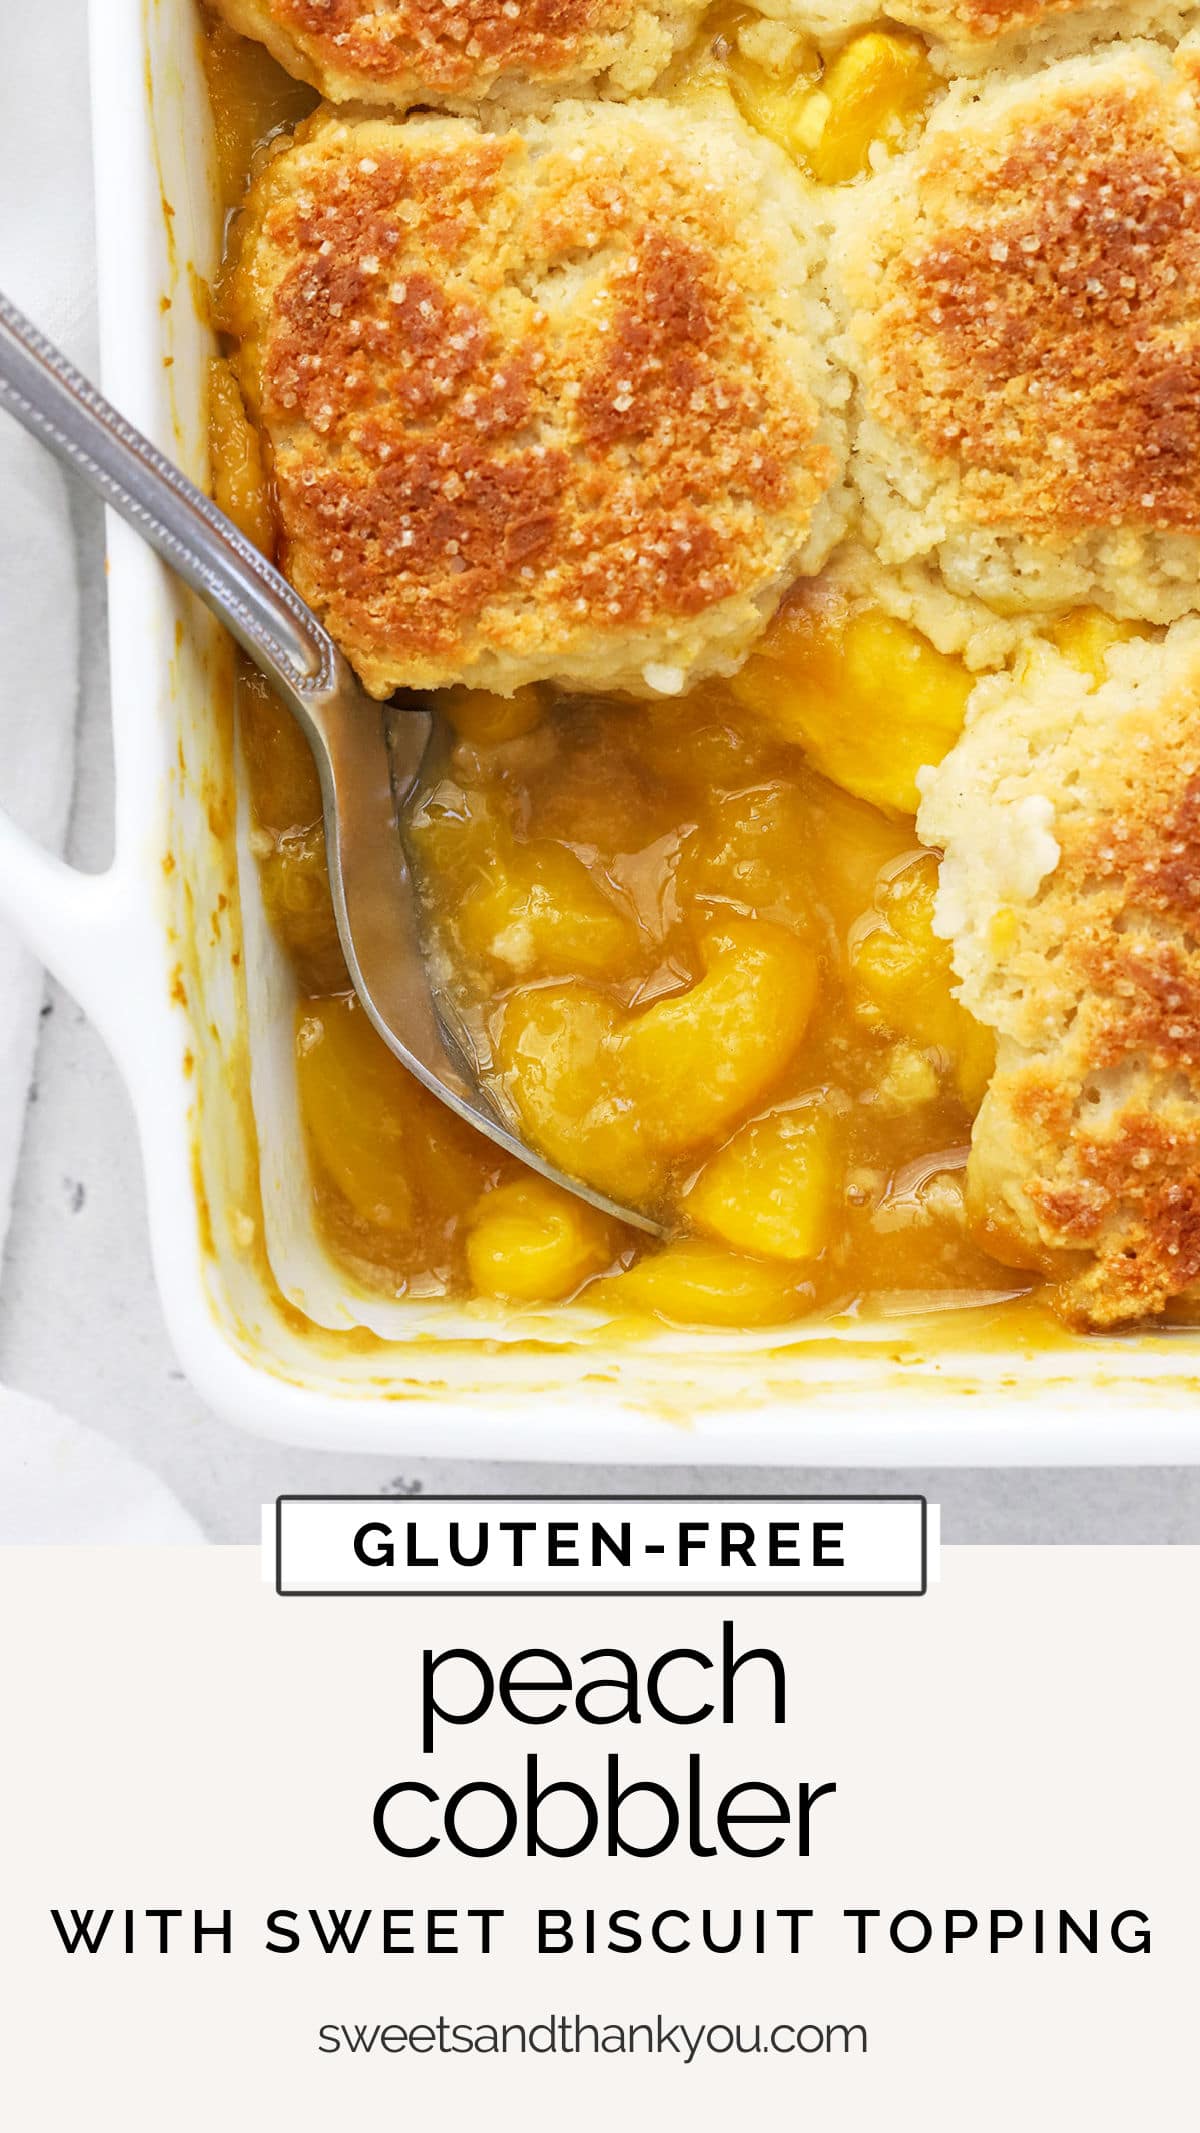 Gluten-Free Peach Cobbler - Gorgeous peach filling with a sweet biscuit cobbler topping. We love this easy gluten-free peach cobbler recipe!  // gluten free peach cobbler with biscuit topping // northern style peach cobbler // gluten-free biscuit peach cobbler // gluten-free peach cobbler filling // gluten-free peach cobbler topping // easy gluten-free peach cobbler // gluten-free peach dessert // gluten-free summer dessert // peach cobbler with ice cream // gluten free summer peach cobbler